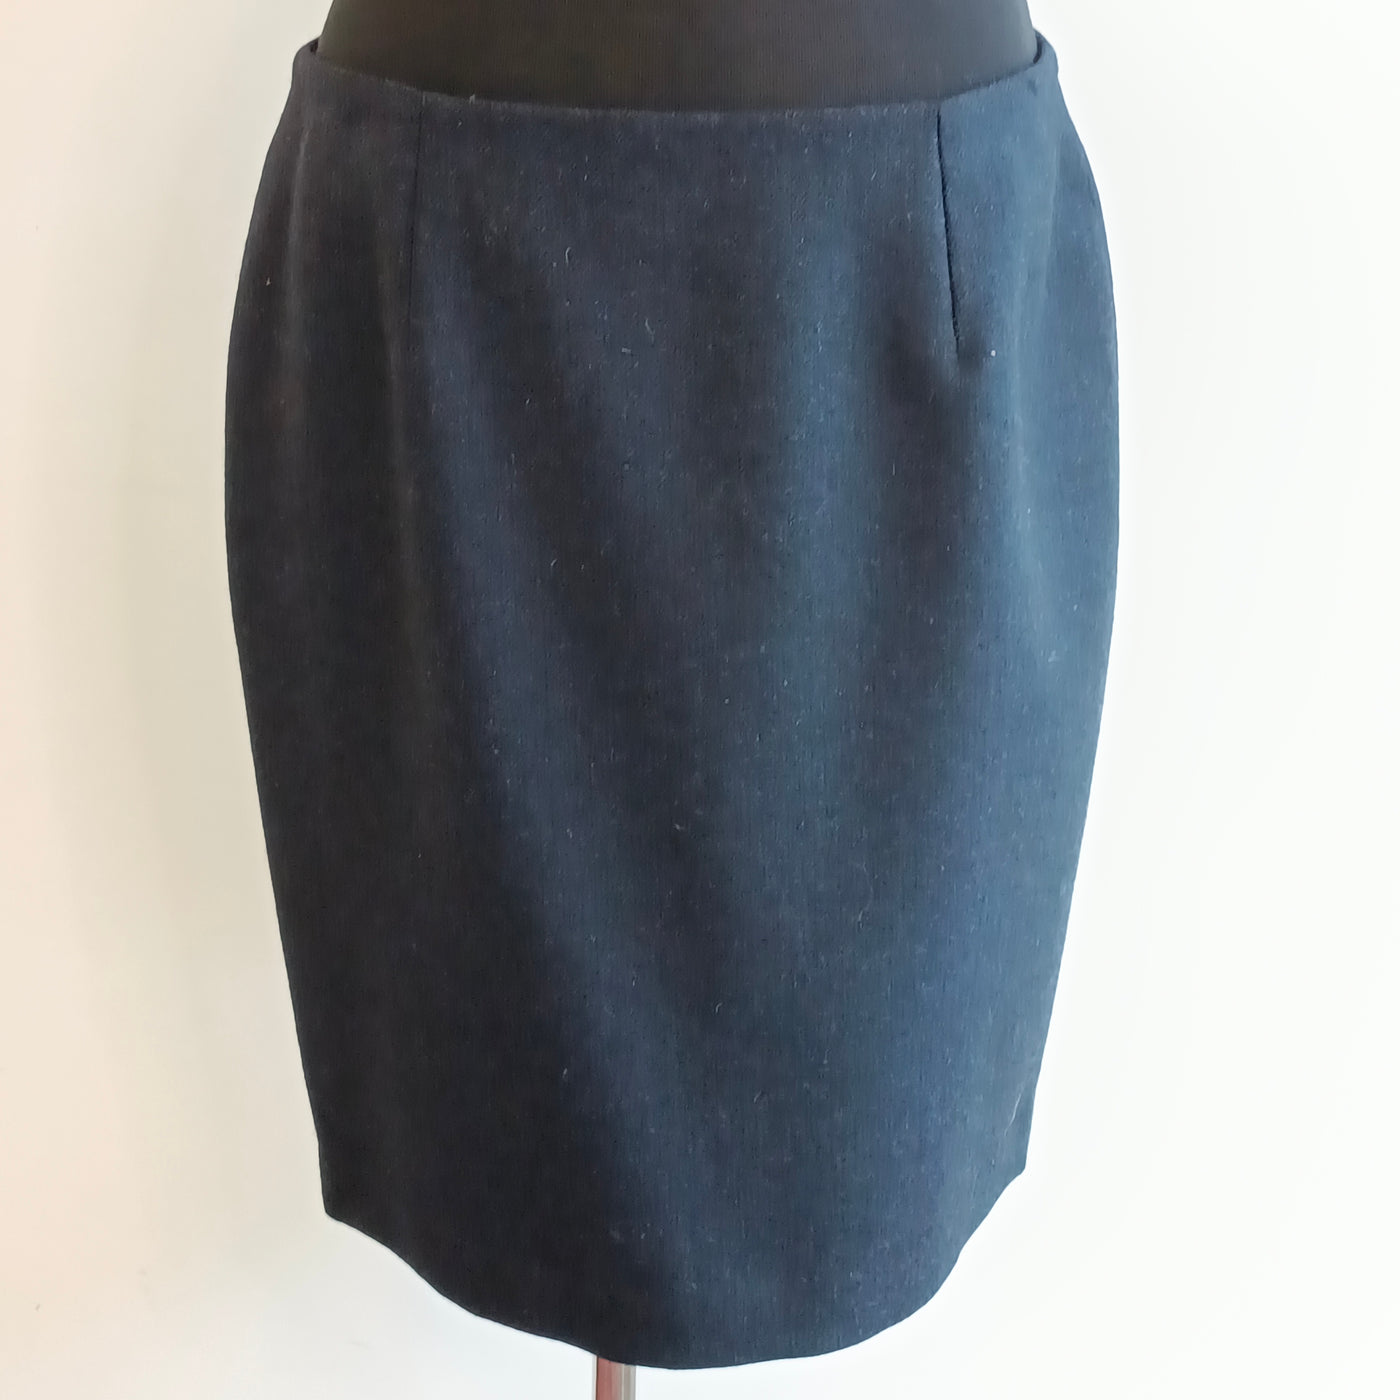 #45 Navy Wool Skirt - SIZE 16 - INCORRECTLY SIZE LABELLED